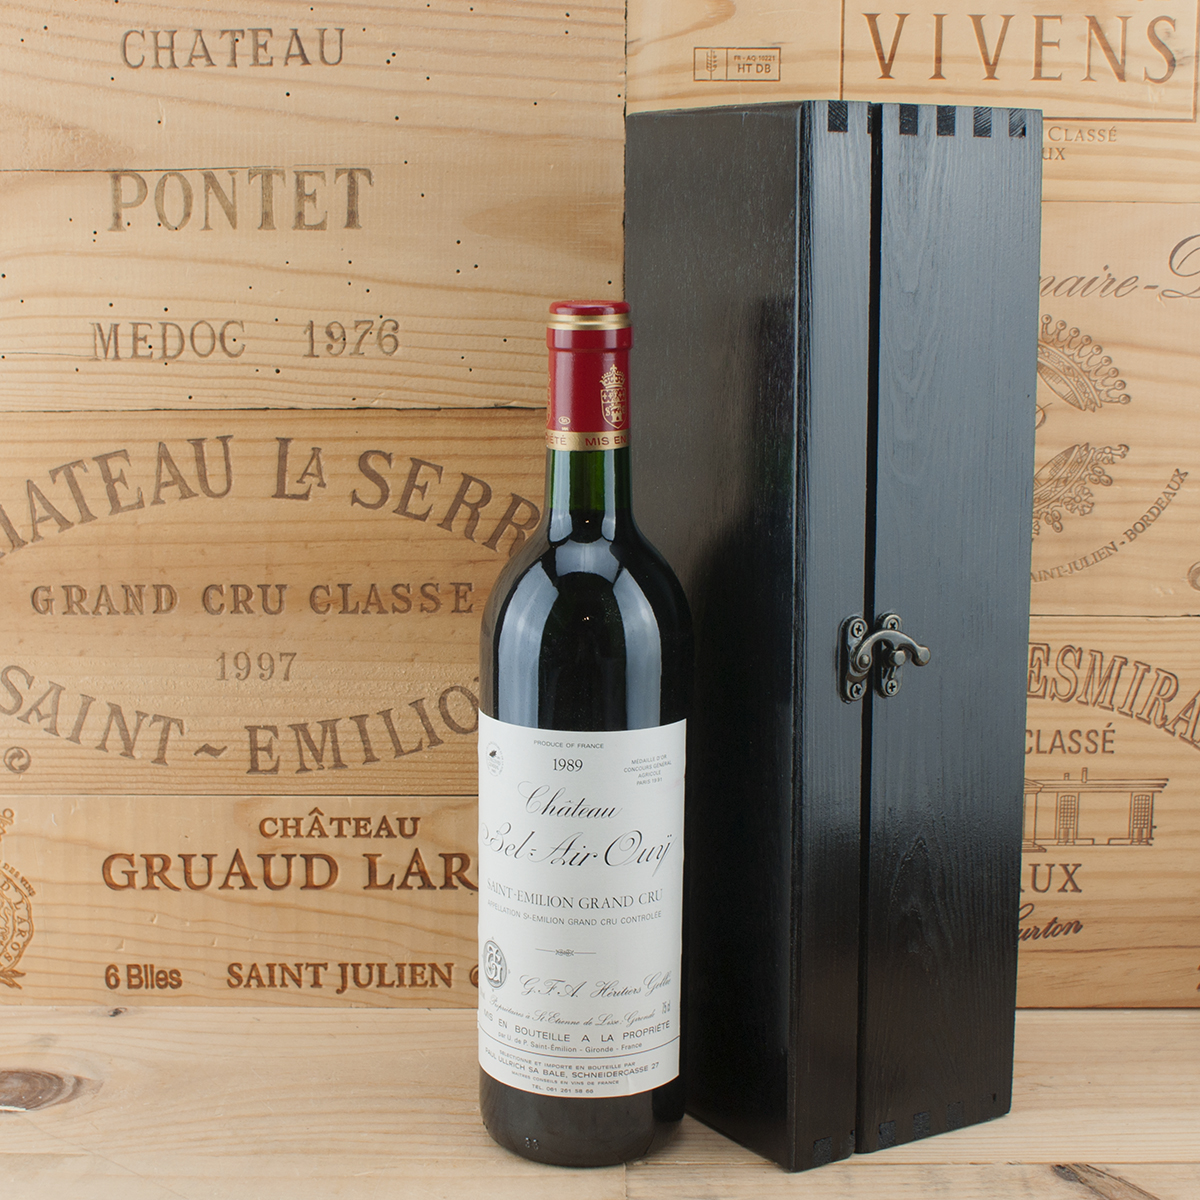 1989 Chateau Bel Air Ouy in the black box